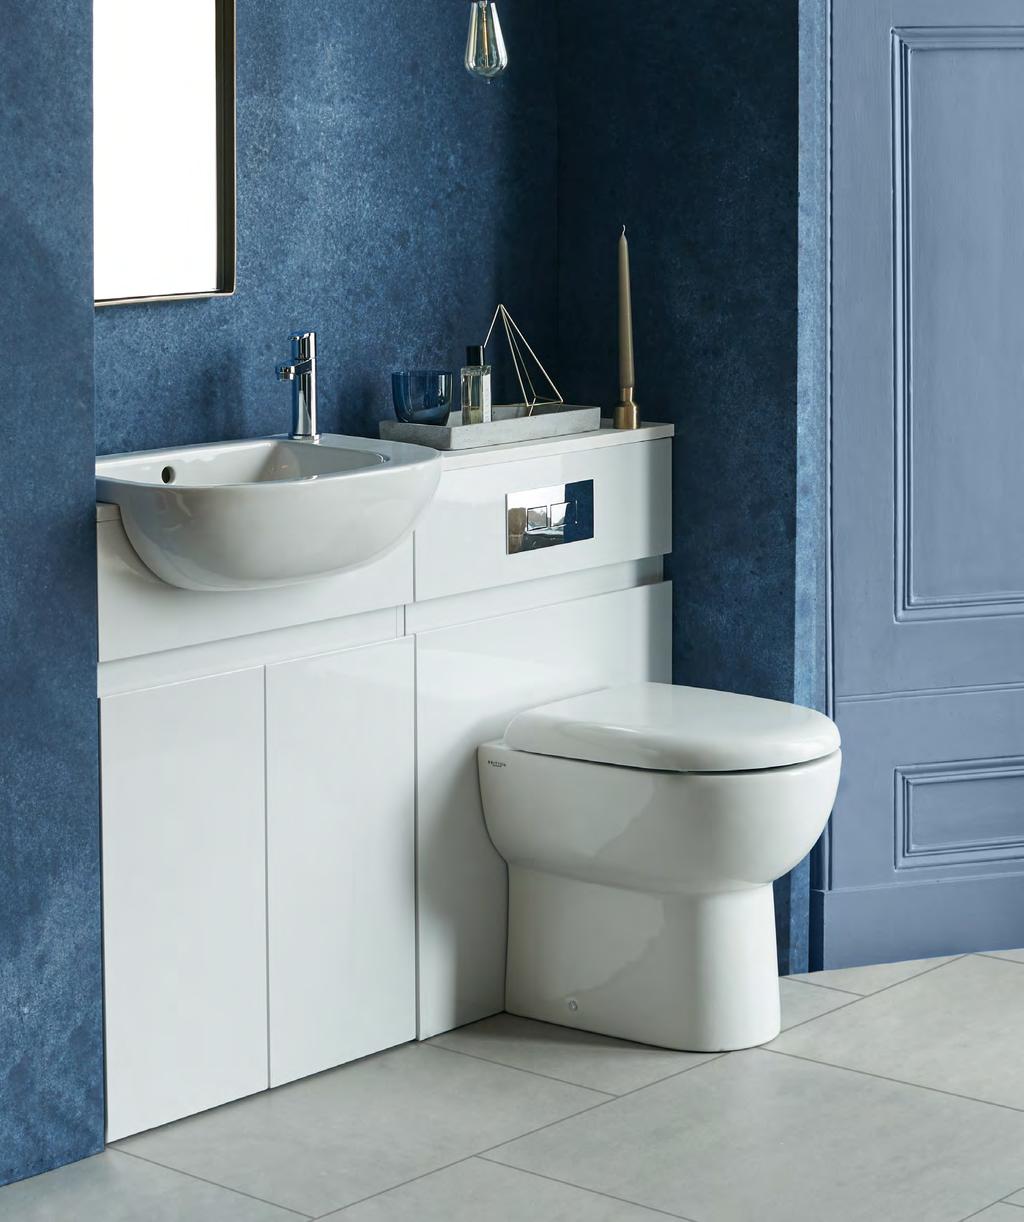 COMPACT FURNITURE A stunning collection from Britton, comes in the form of the Compact furniture range, including wall hung or freestanding vanity units in either 600mm or 900mm with basins in either